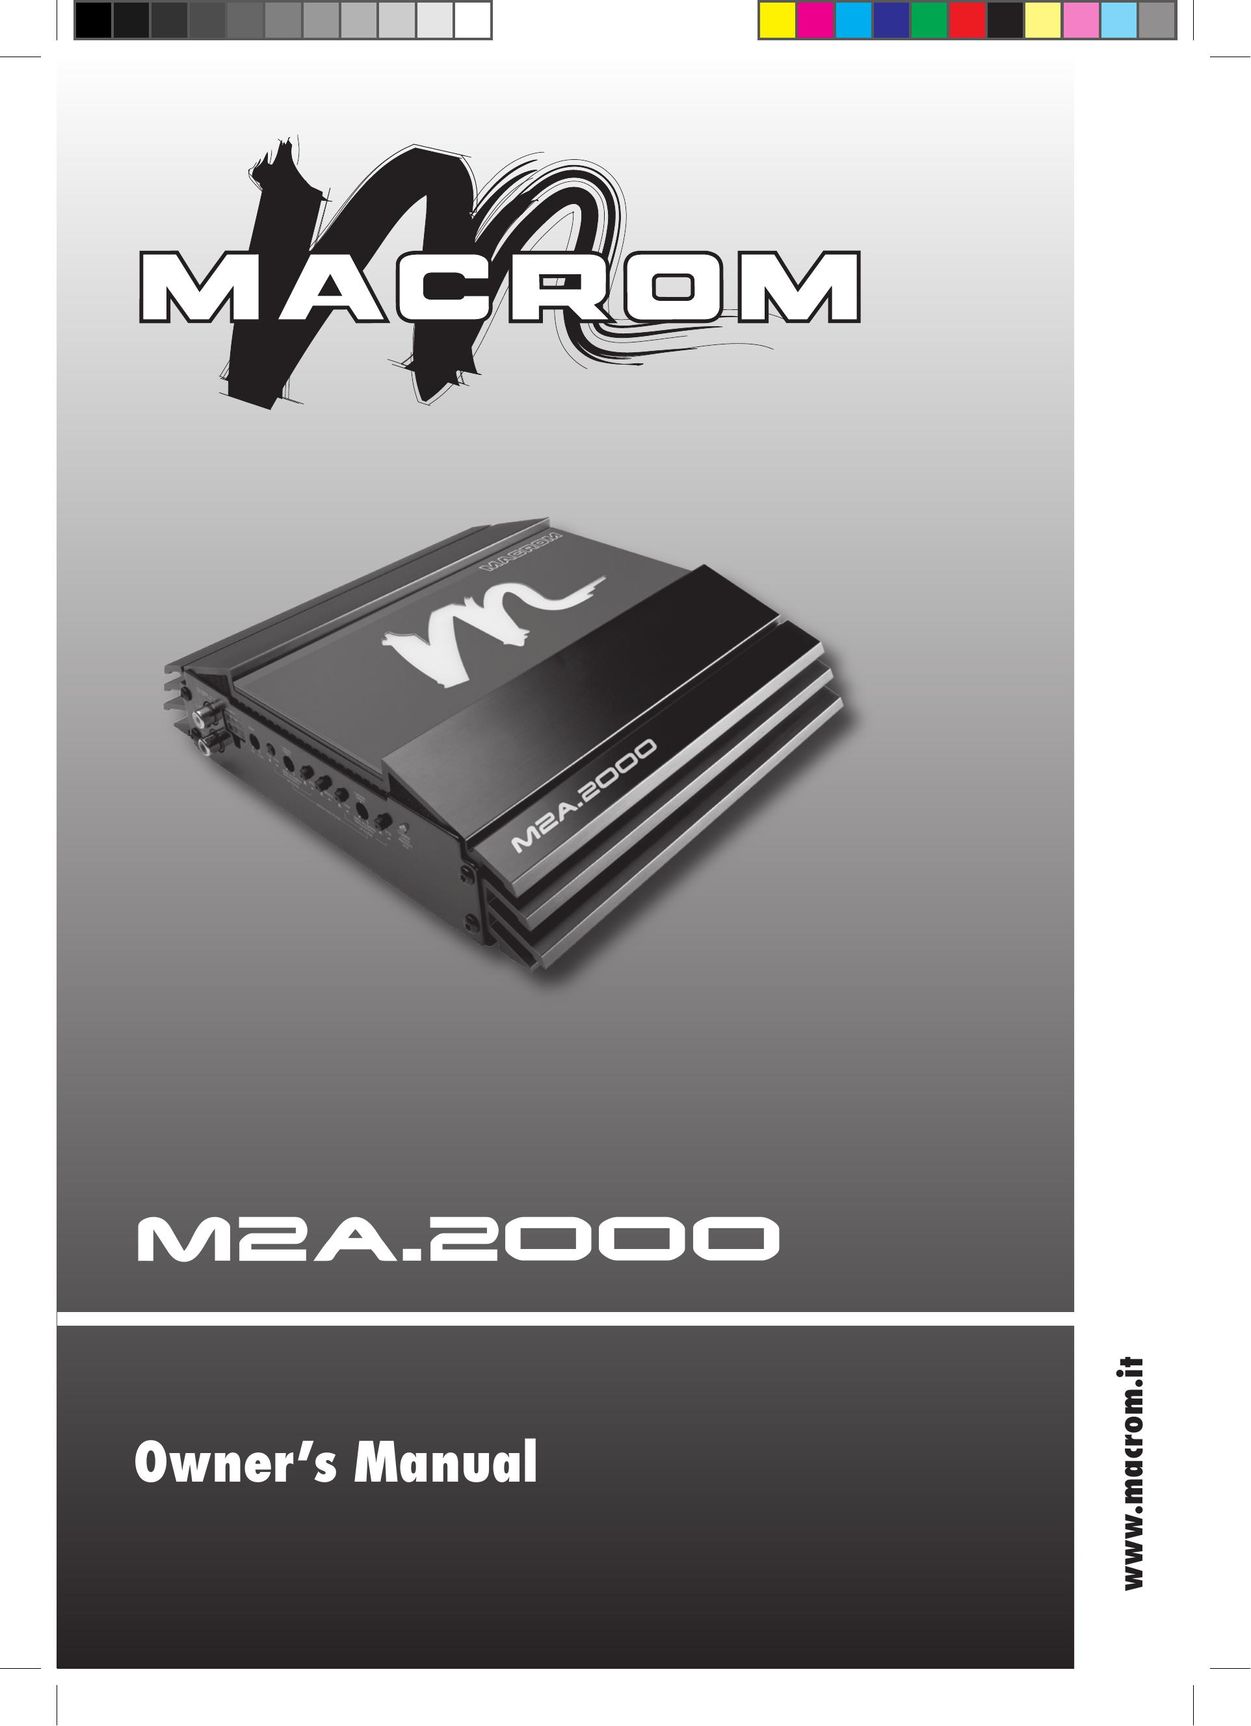 Macrom M2A.2000 Stereo Amplifier User Manual